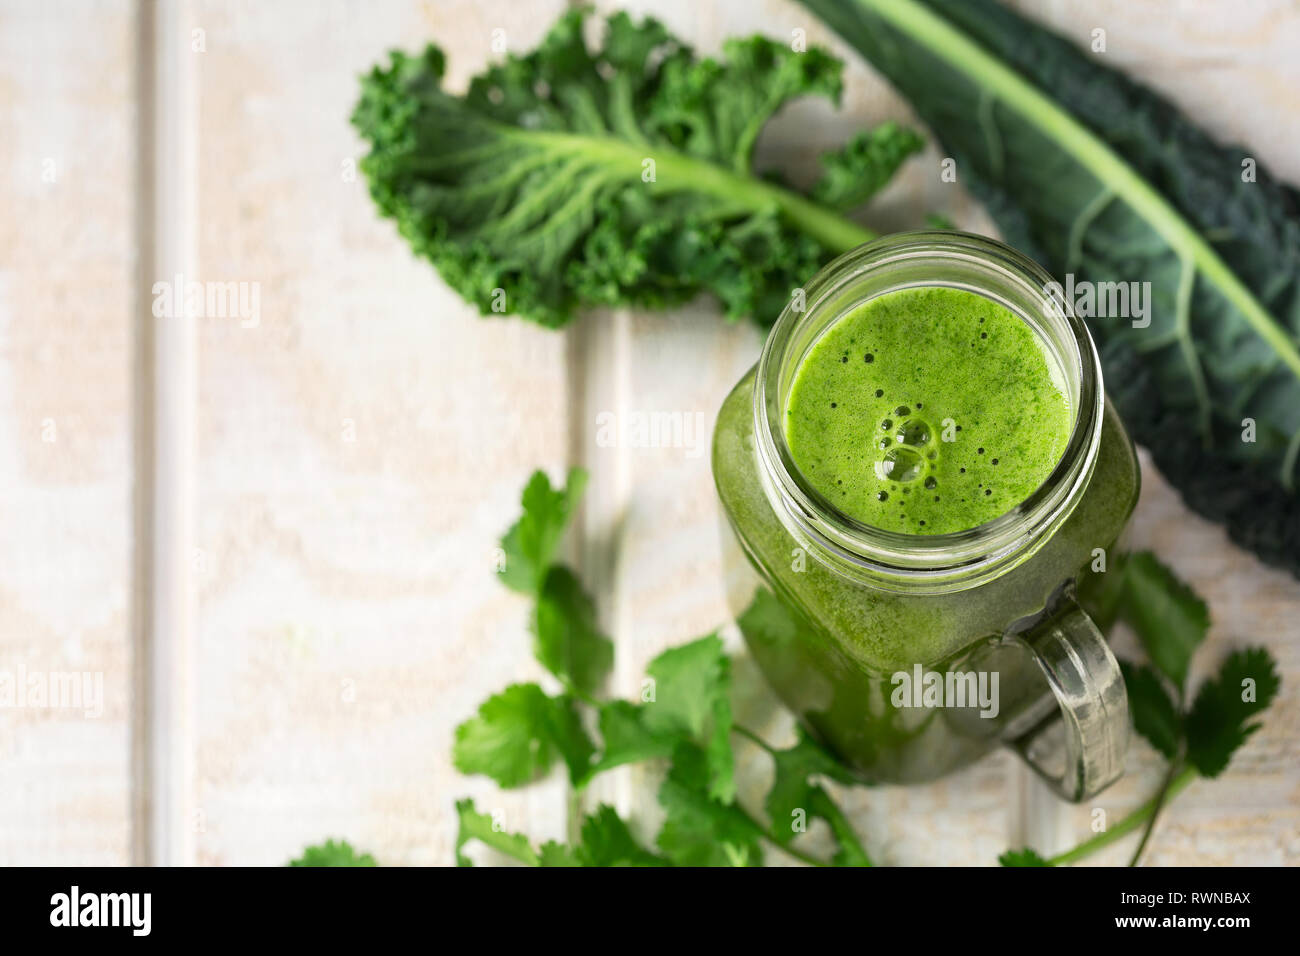 Green juice made from kale and cilantro on a white wooden surface with copy space Stock Photo